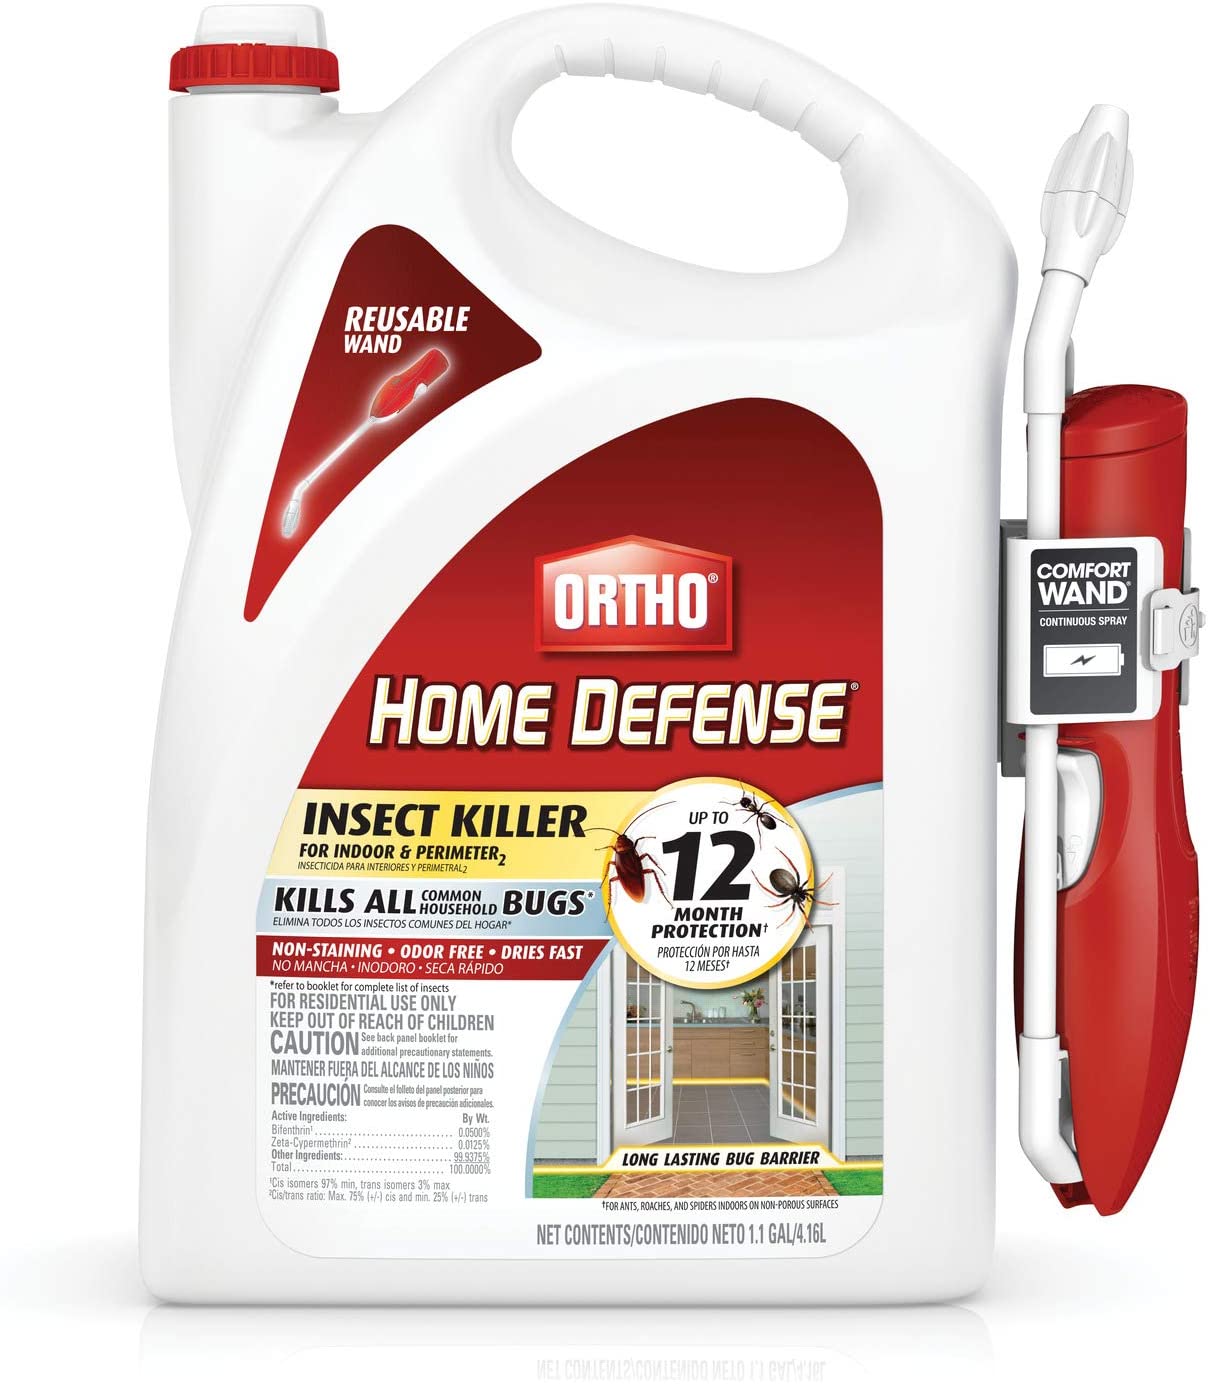 Ortho Home Defense Stain-Free Indoor Ant & Insect Killer Spray